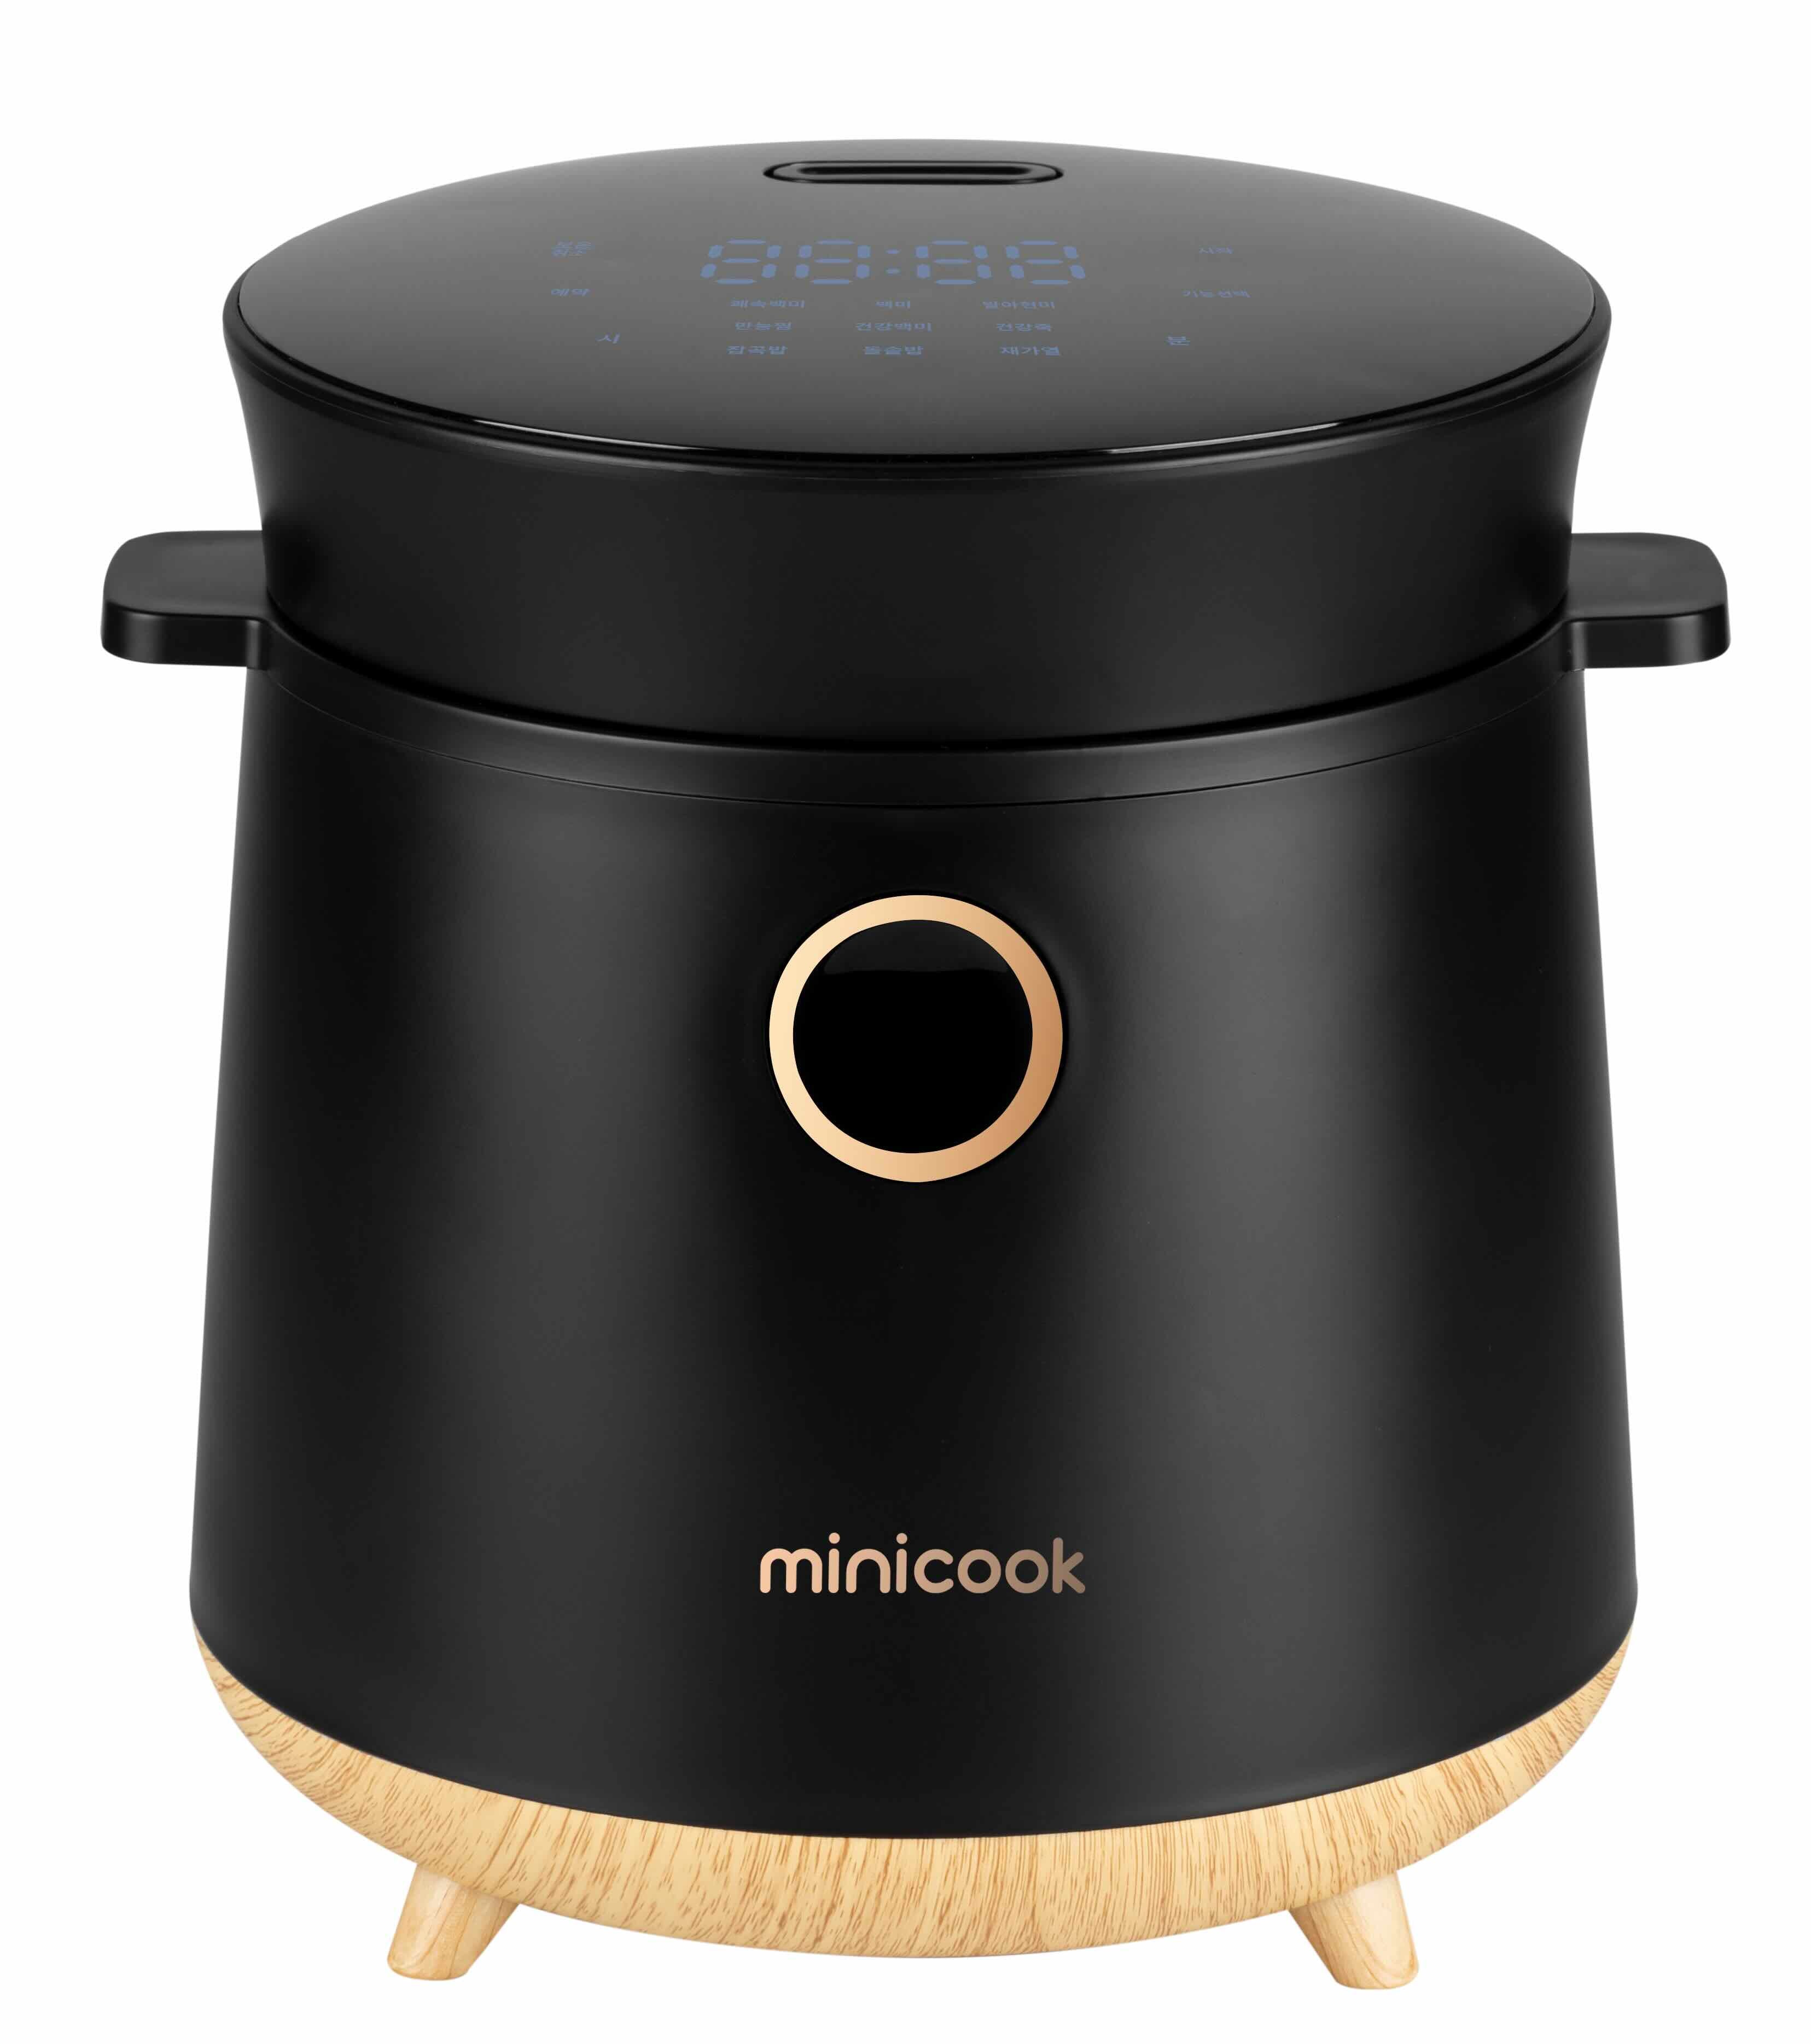 Portable Mini Rice Cooker for Travel - Stainless Steel Inner Pot,  Multi-Function Design, Low Carb